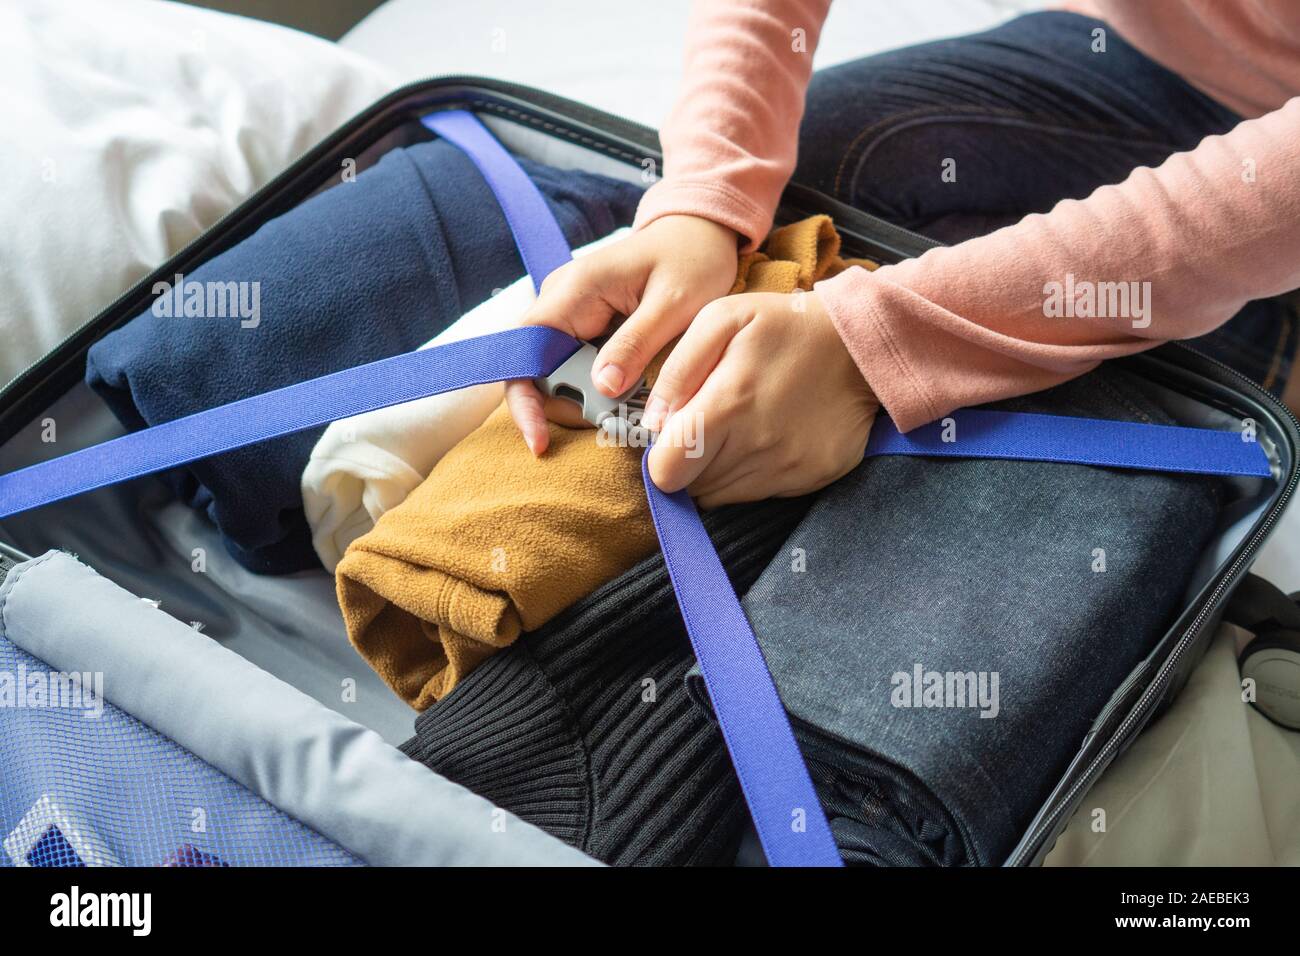 attractive girl packing suitcase for vacation Stock Photo - Alamy